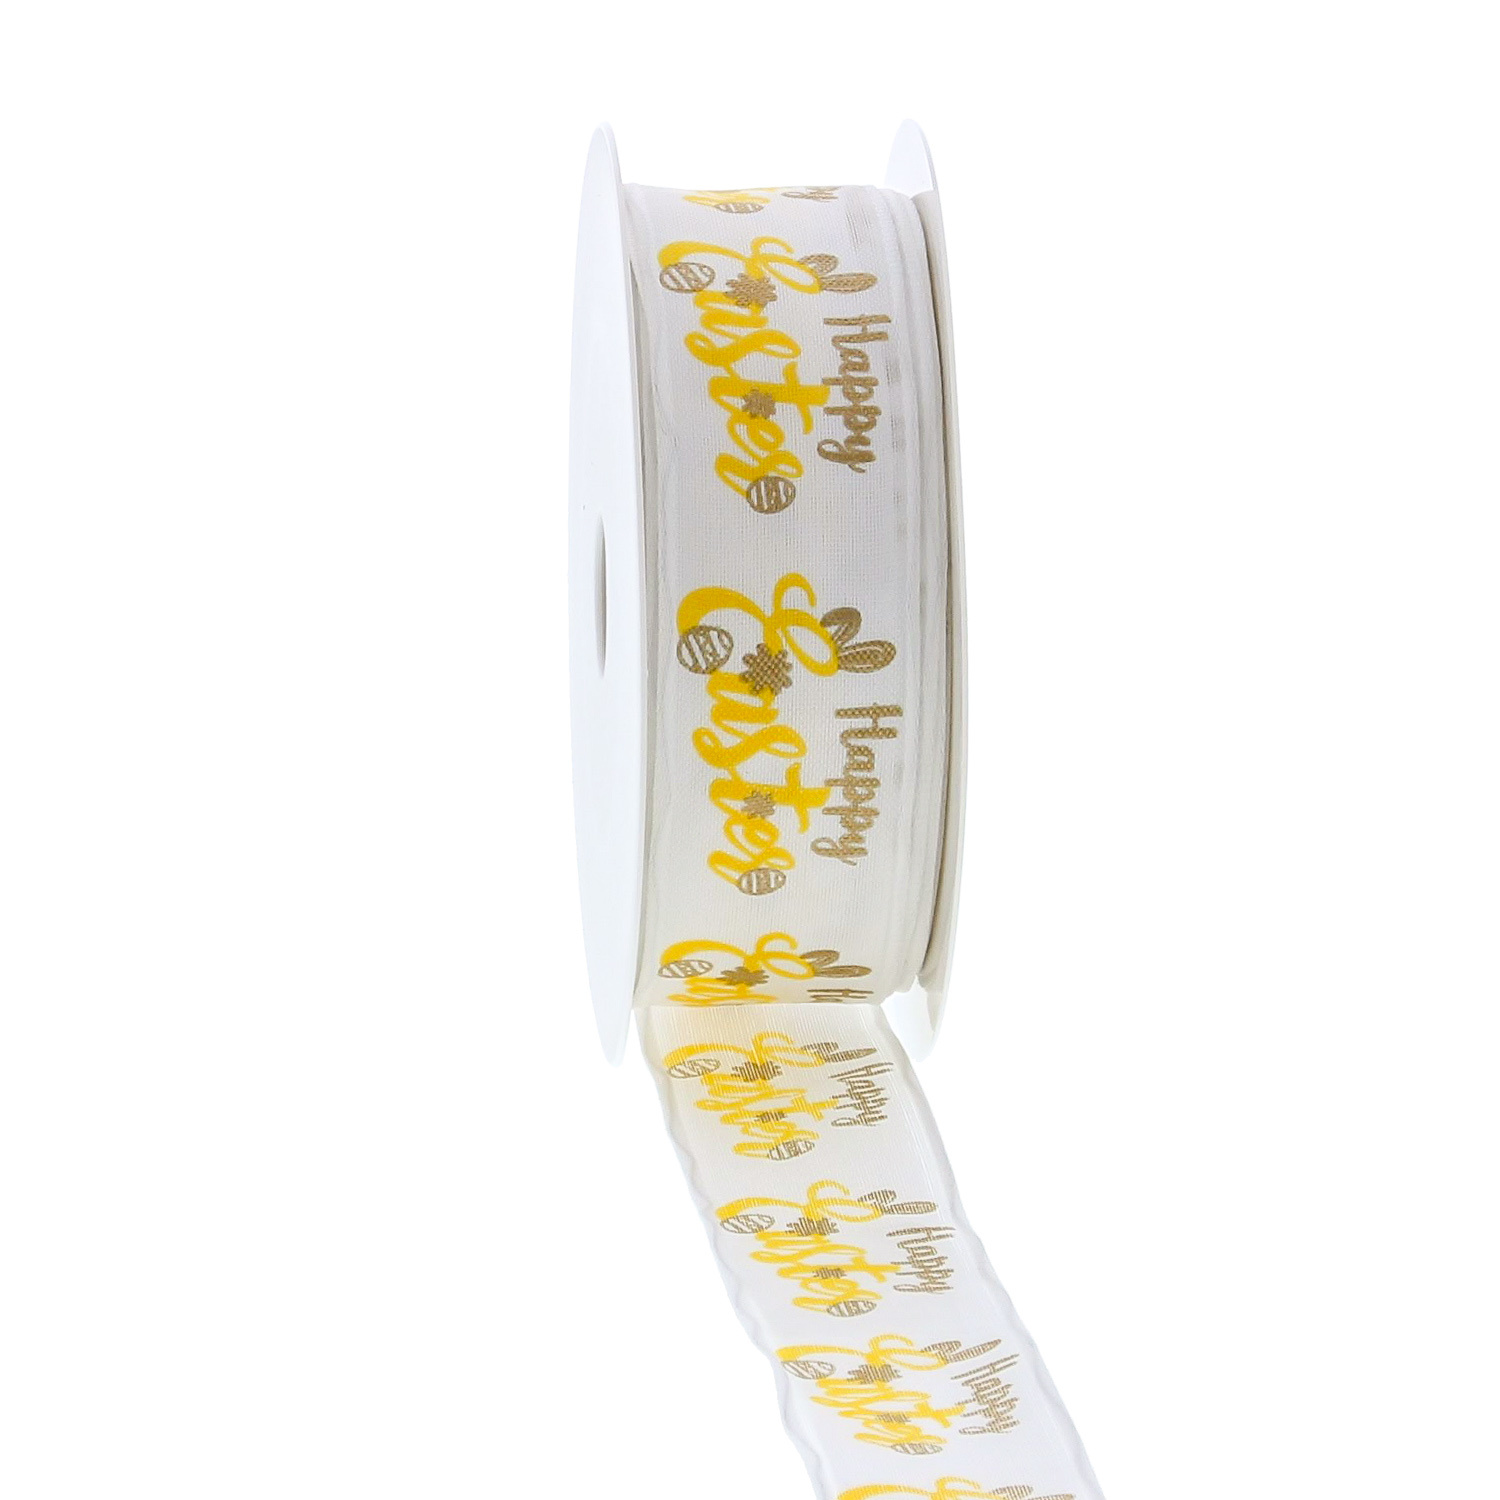 "Happy Easter" - Ribbon with yellow-gold wire - 25mm - 20m